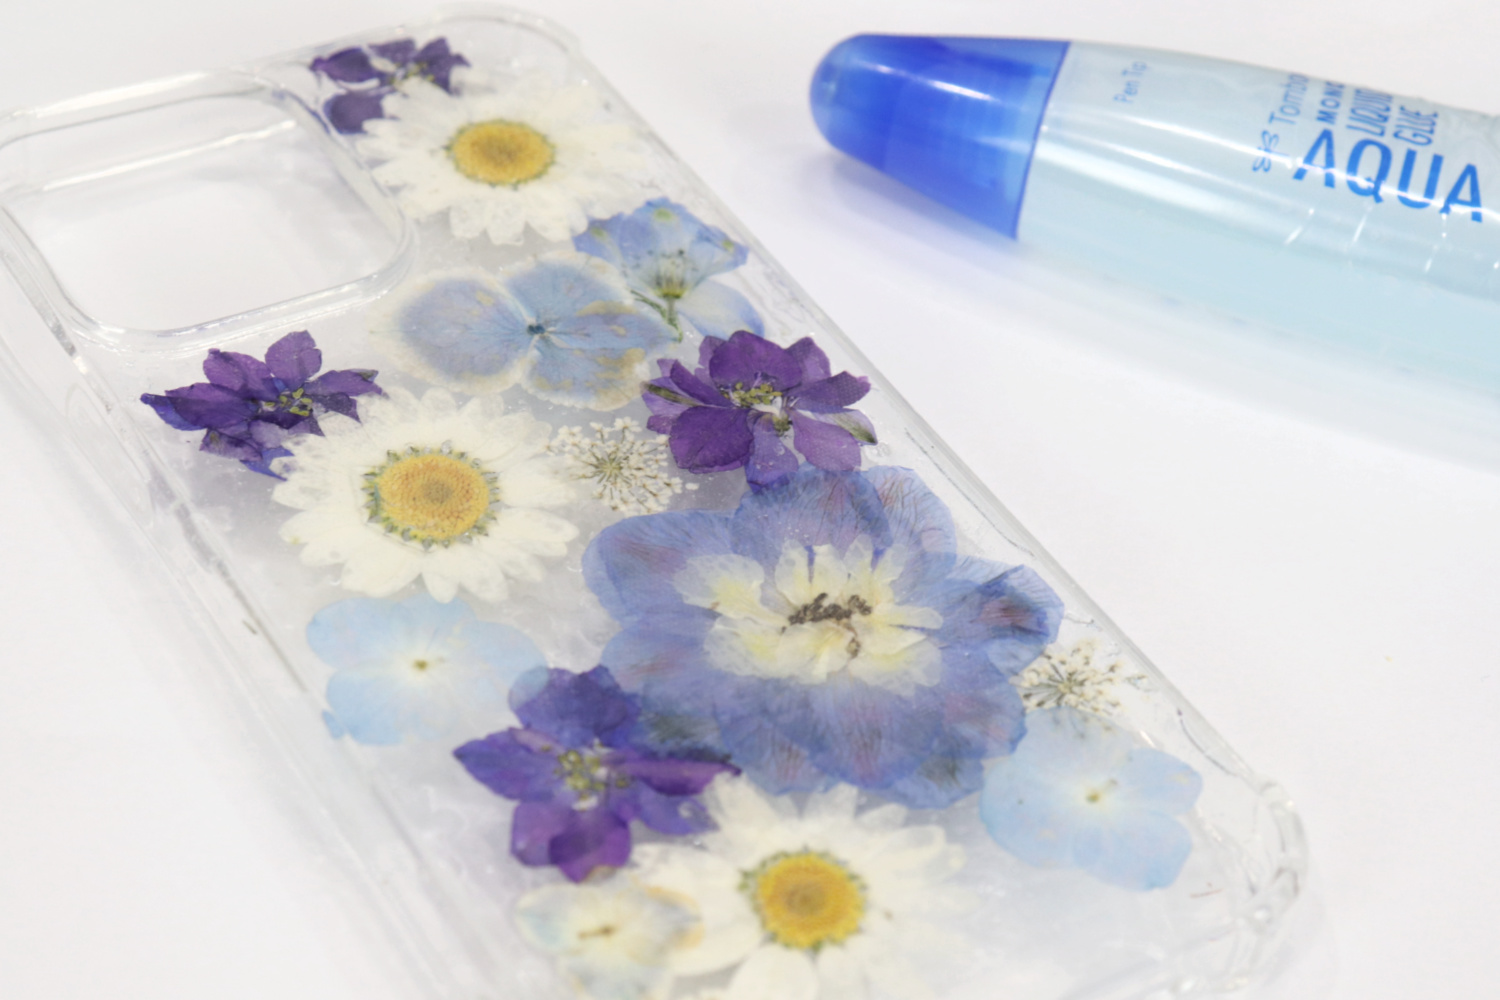 Image contains a clear phone case decorated with an assortment of white, blue, and purple pressed flowers on a white table. A tube of Tombow MONO Aqua Liquid Glue sits off to the side.